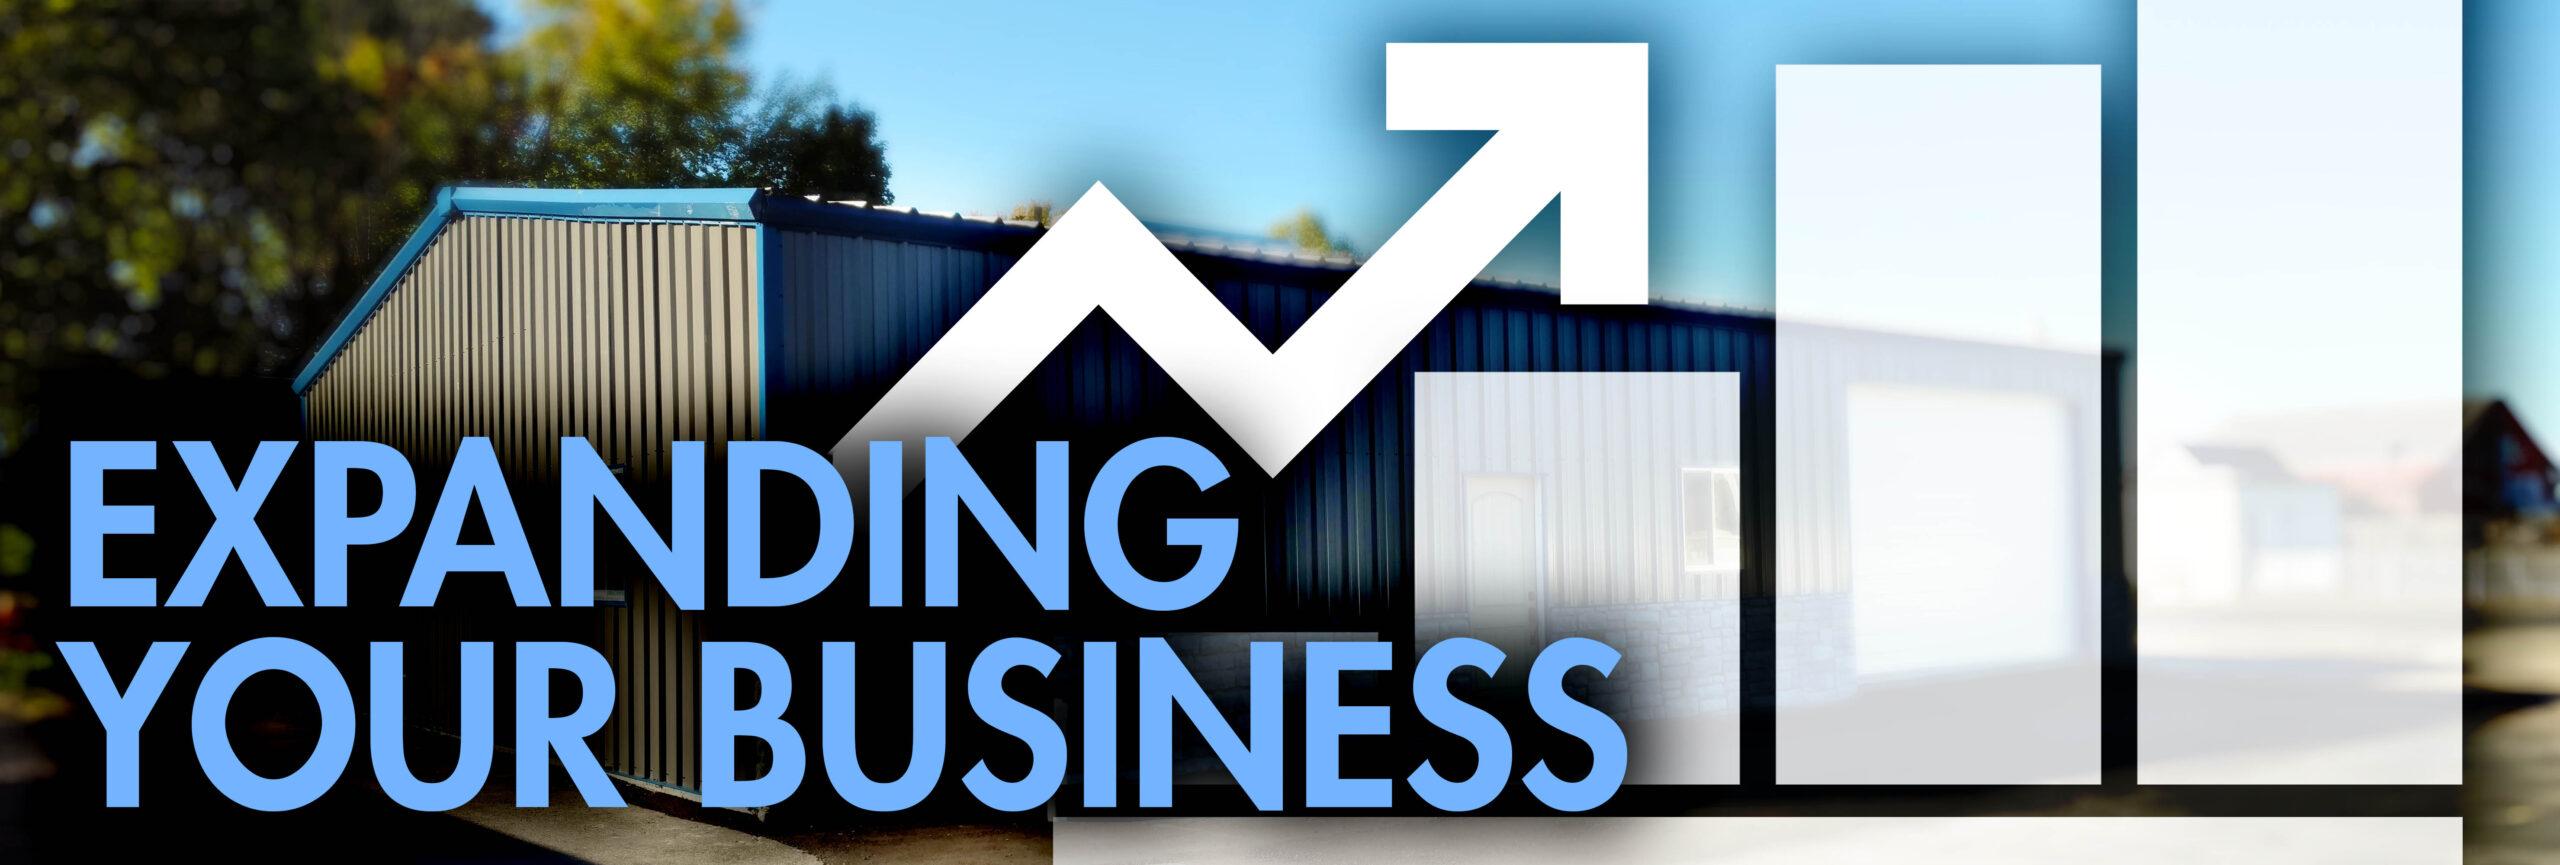 Expanding Your Business? Consider Metal Steel Buildings for Rapid Growth